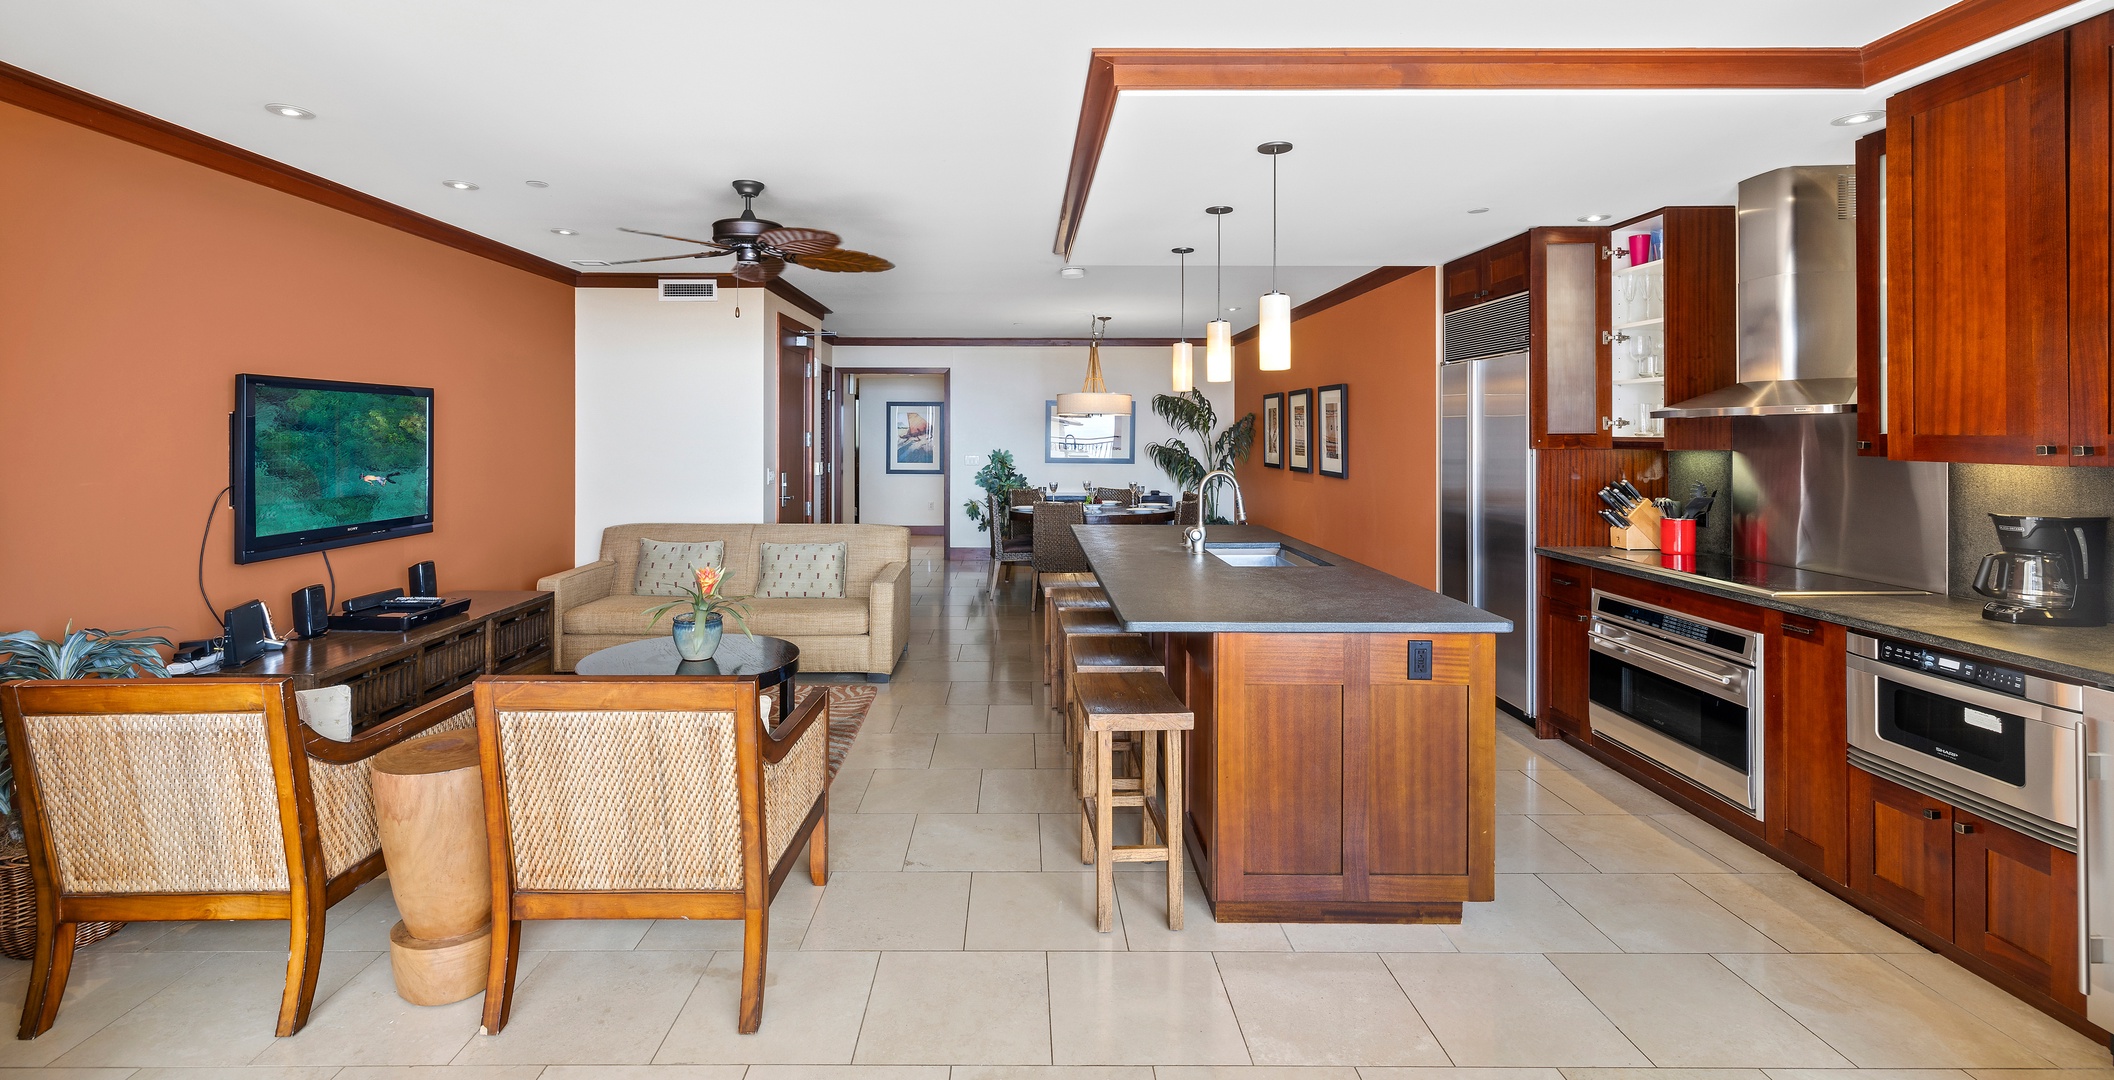 Kapolei Vacation Rentals, Ko Olina Beach Villas O1001 - A well designed living area with warm wood accents.